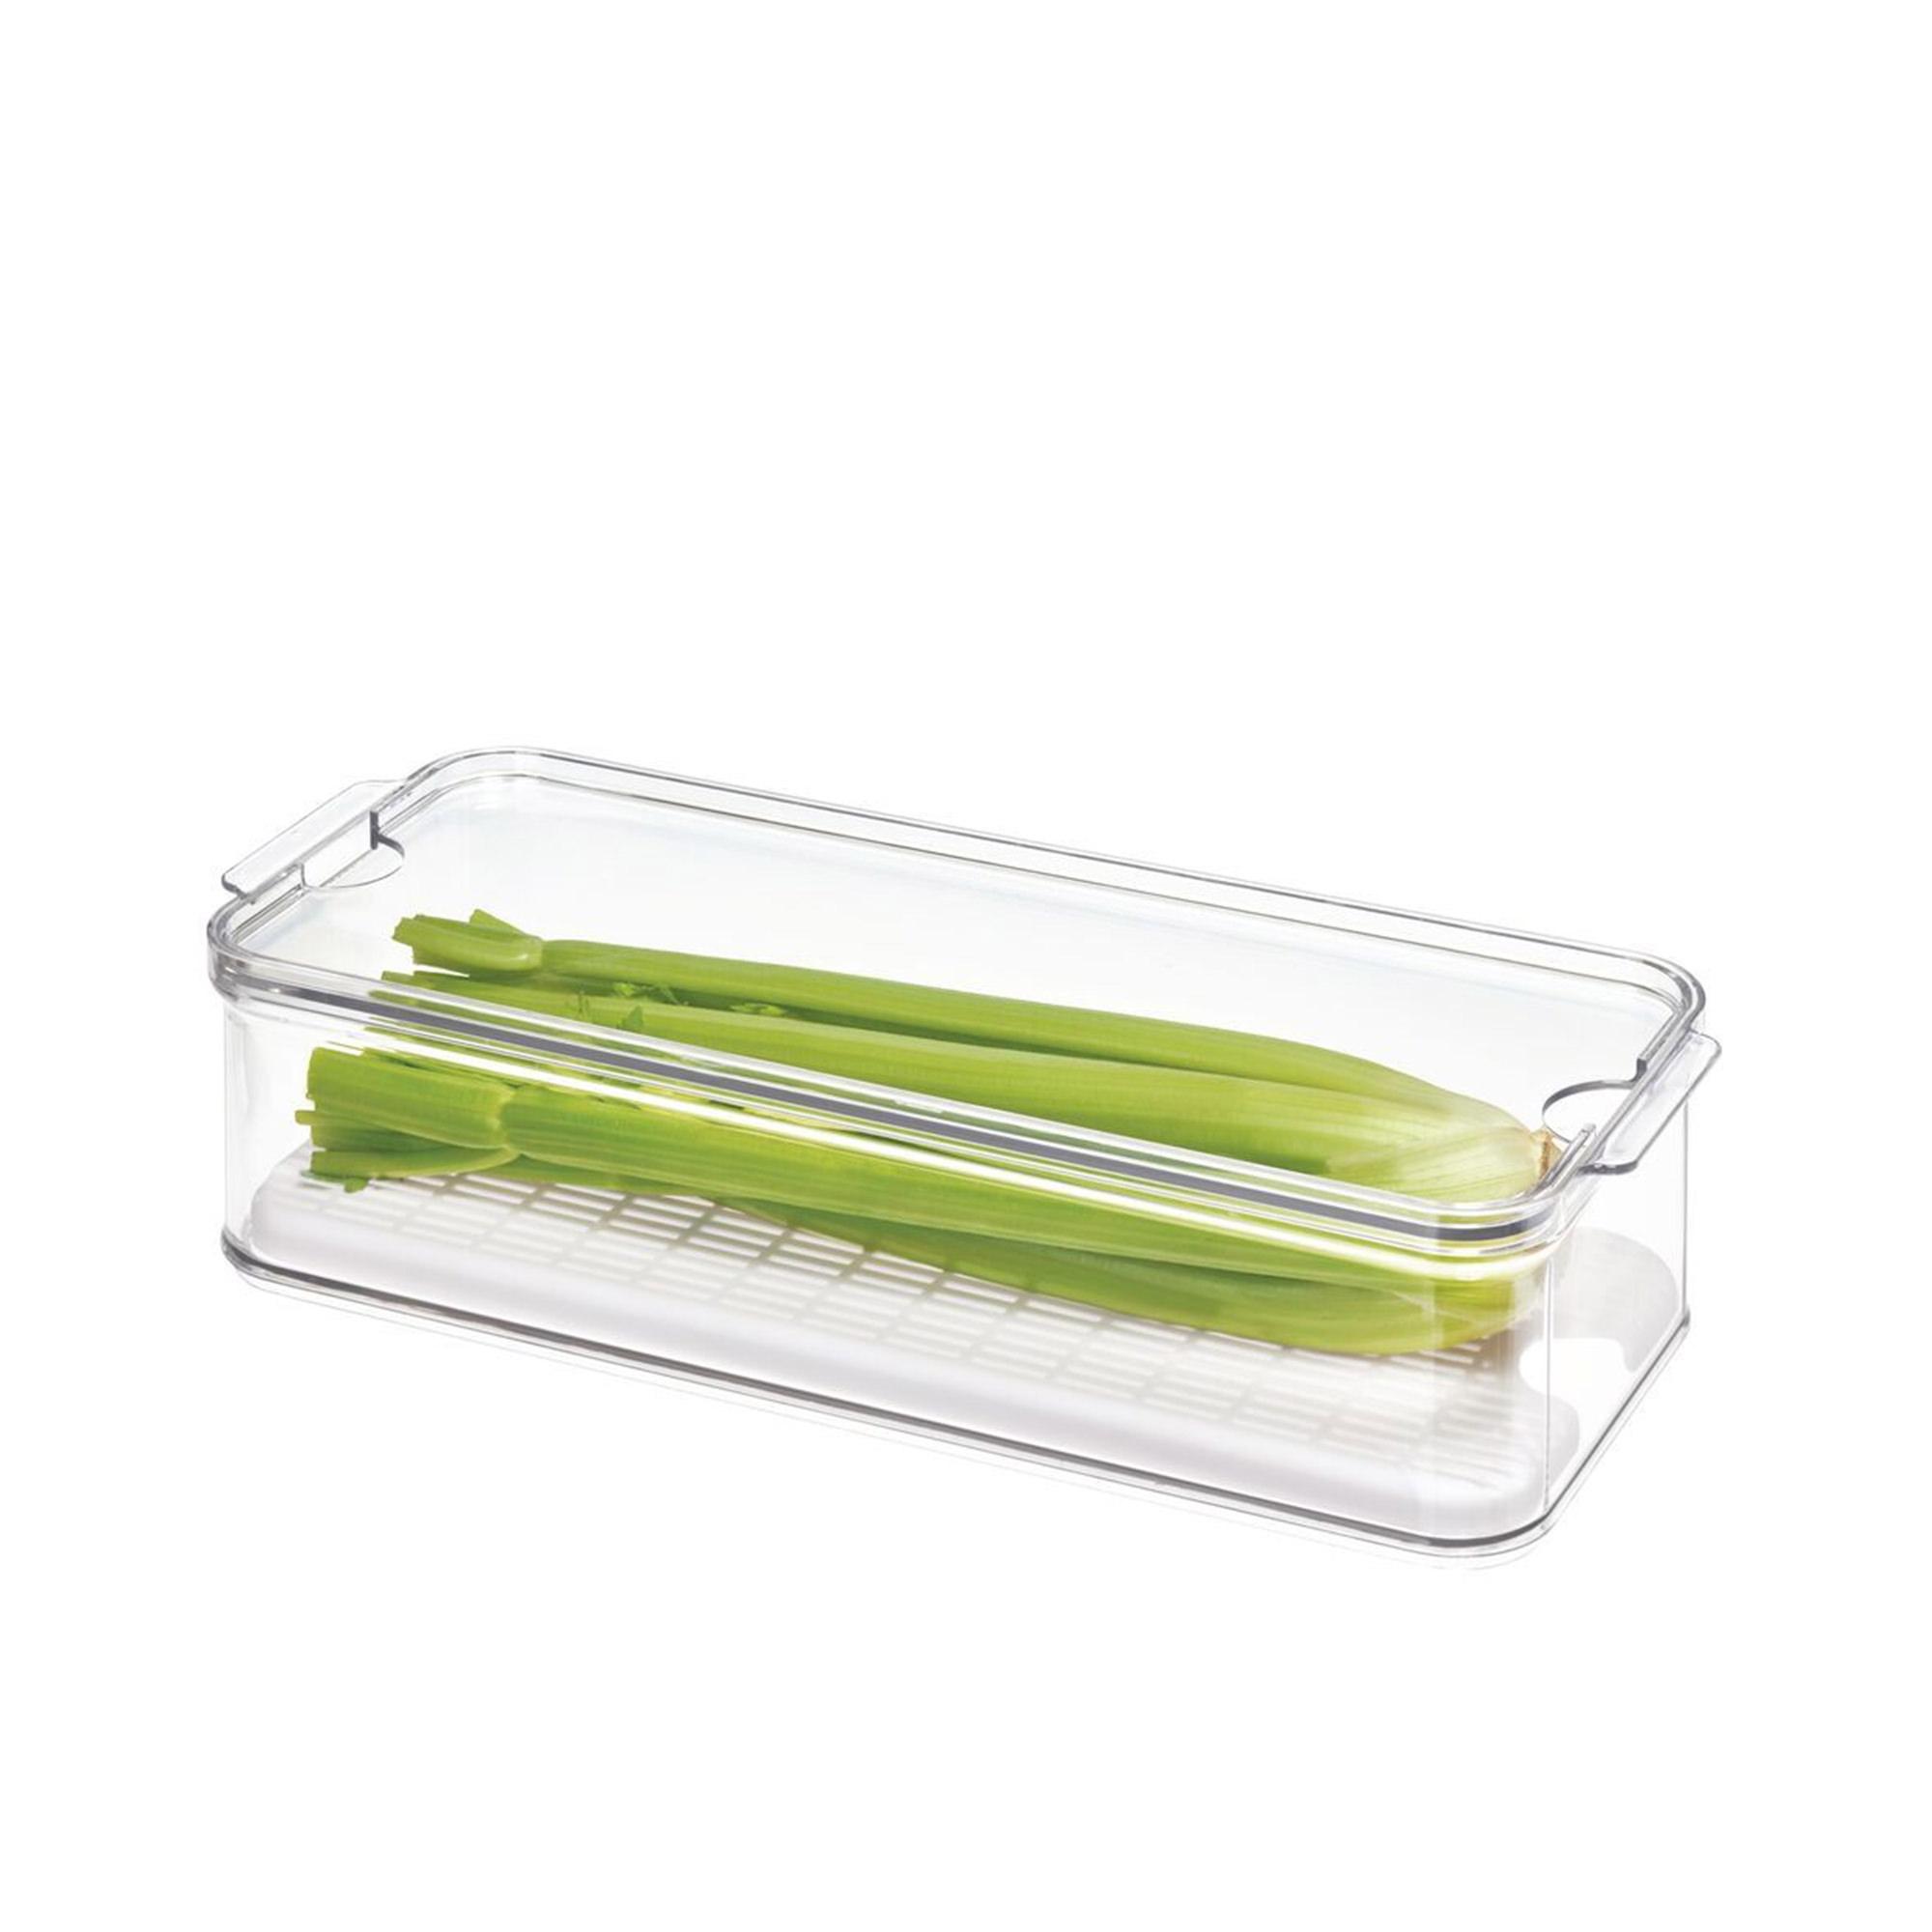 iDesign Crisp Produce Bin with Lid Clear Image 5